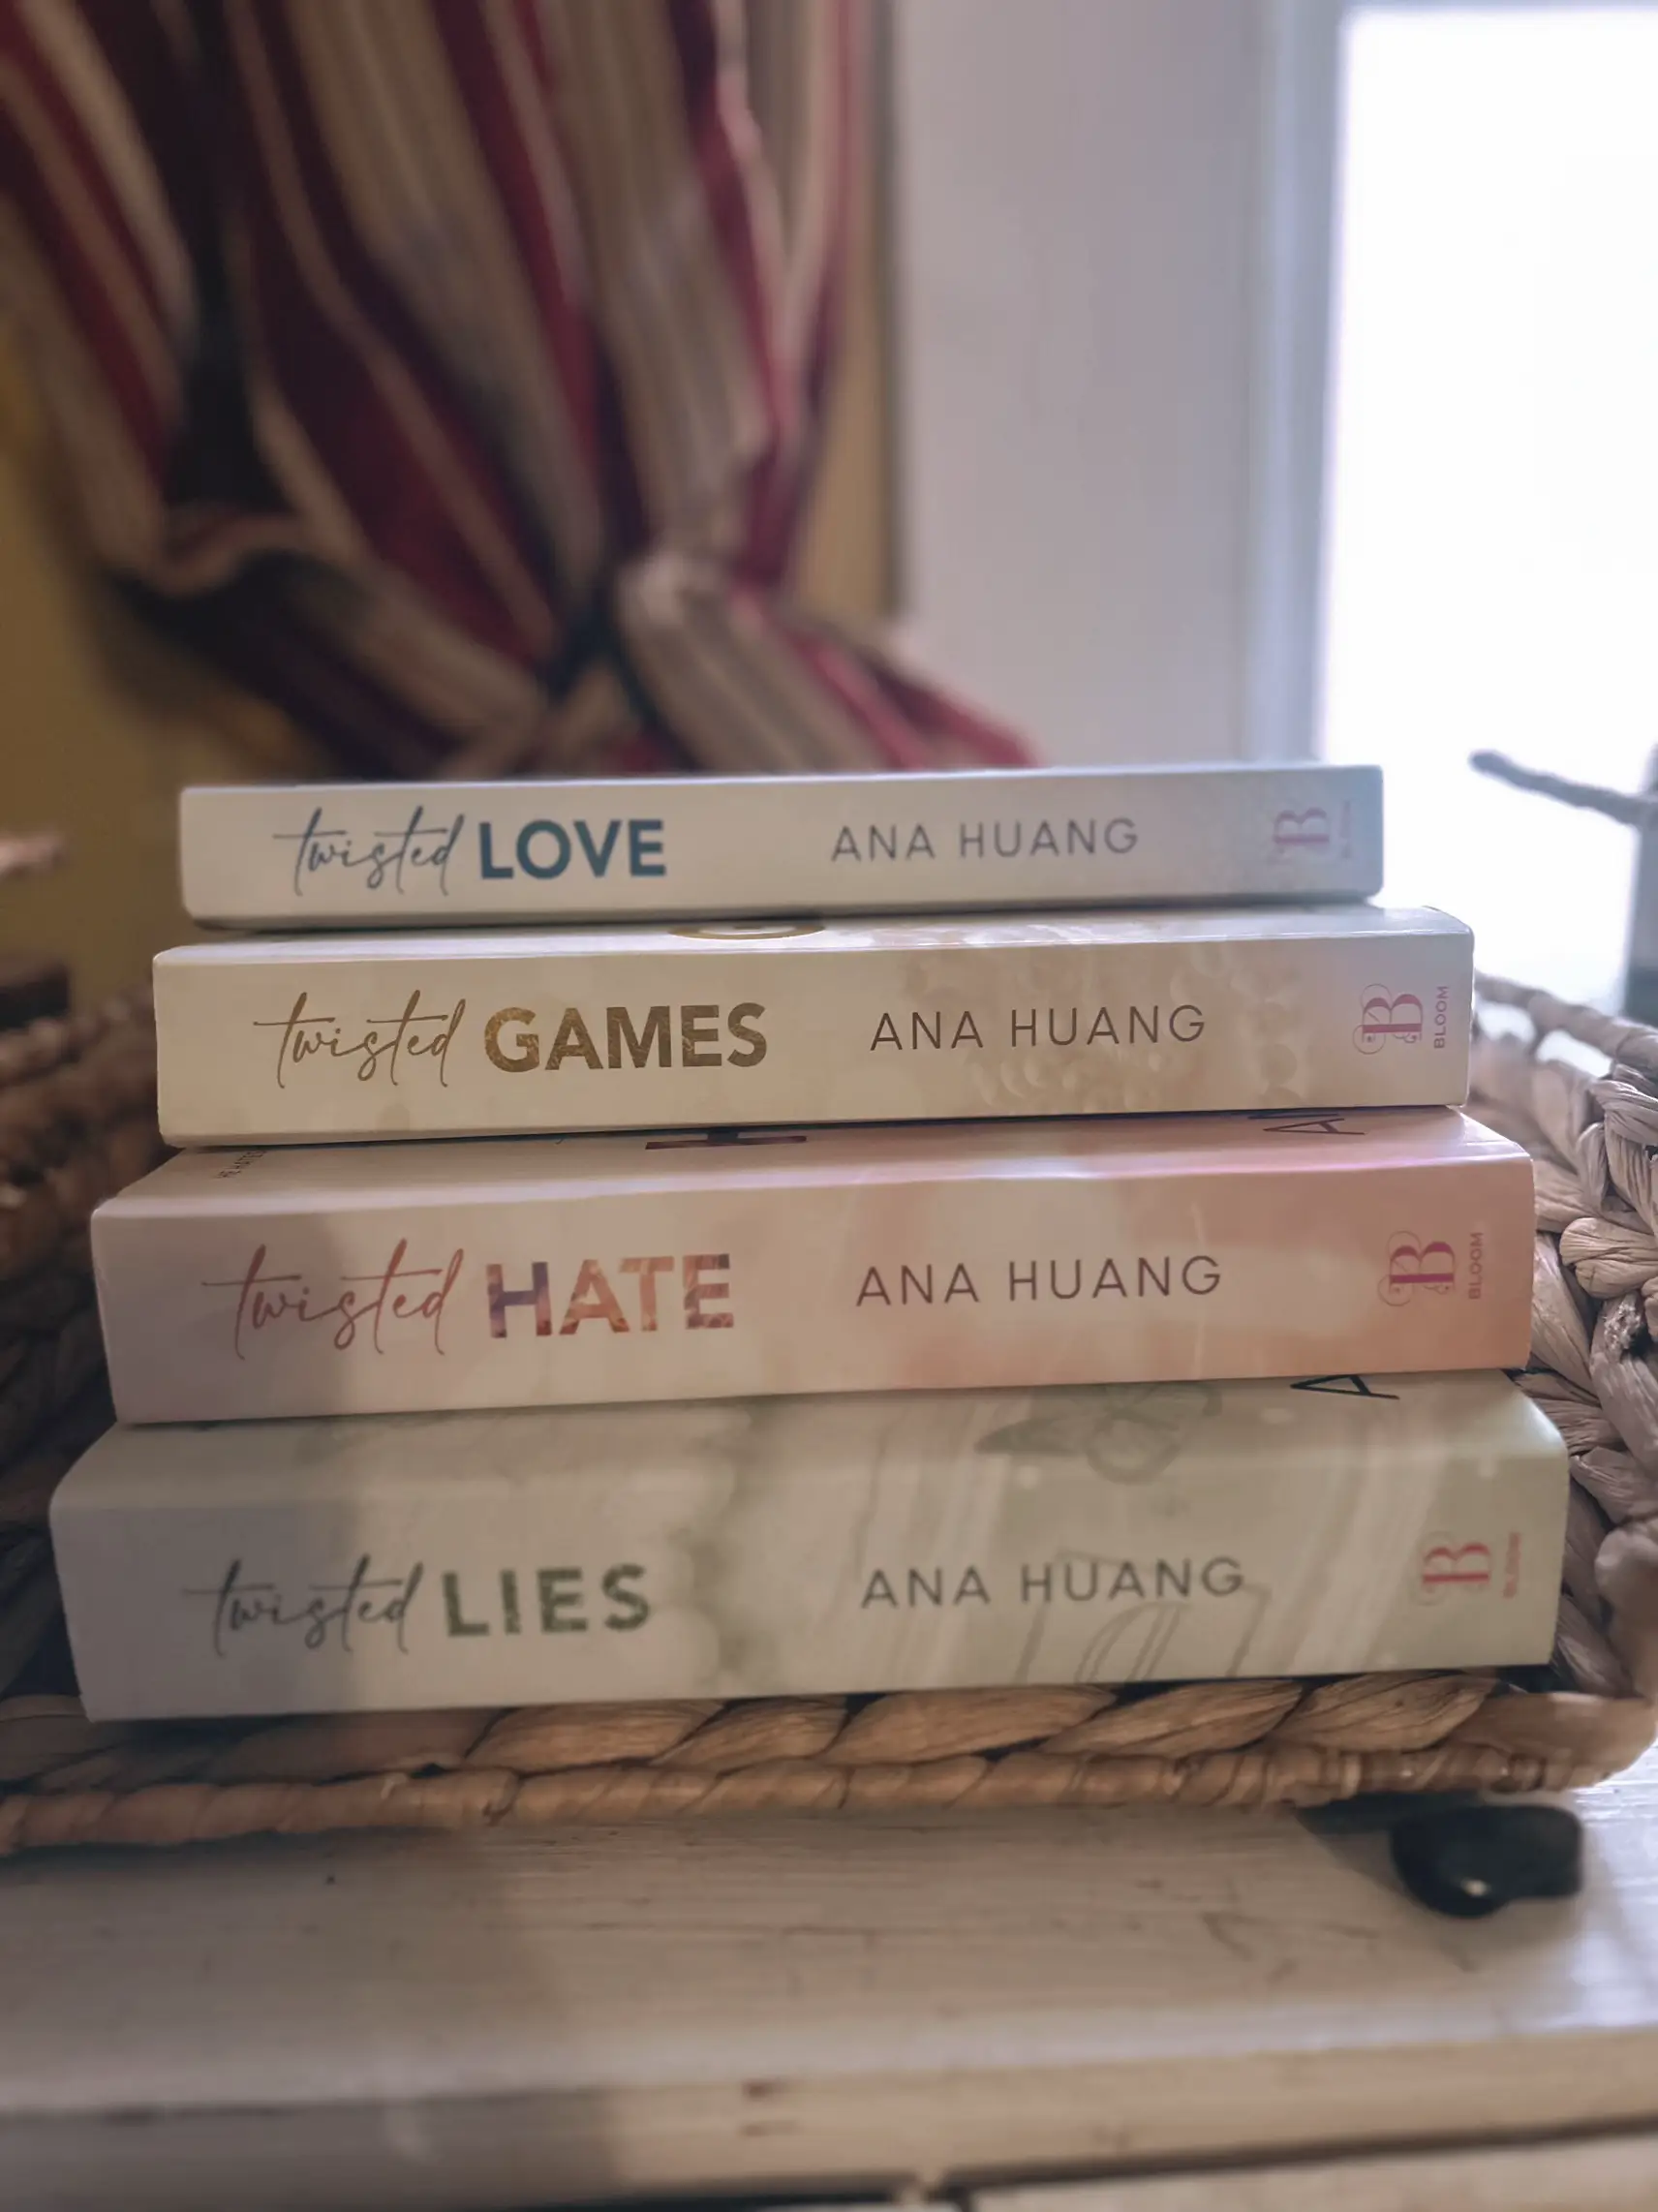 Nia ♡ on X: Ana huang you are insane Billionaires, sins, and women who are  going to turn their world ??? I'm gonna eat up this series. I have a  feeling king